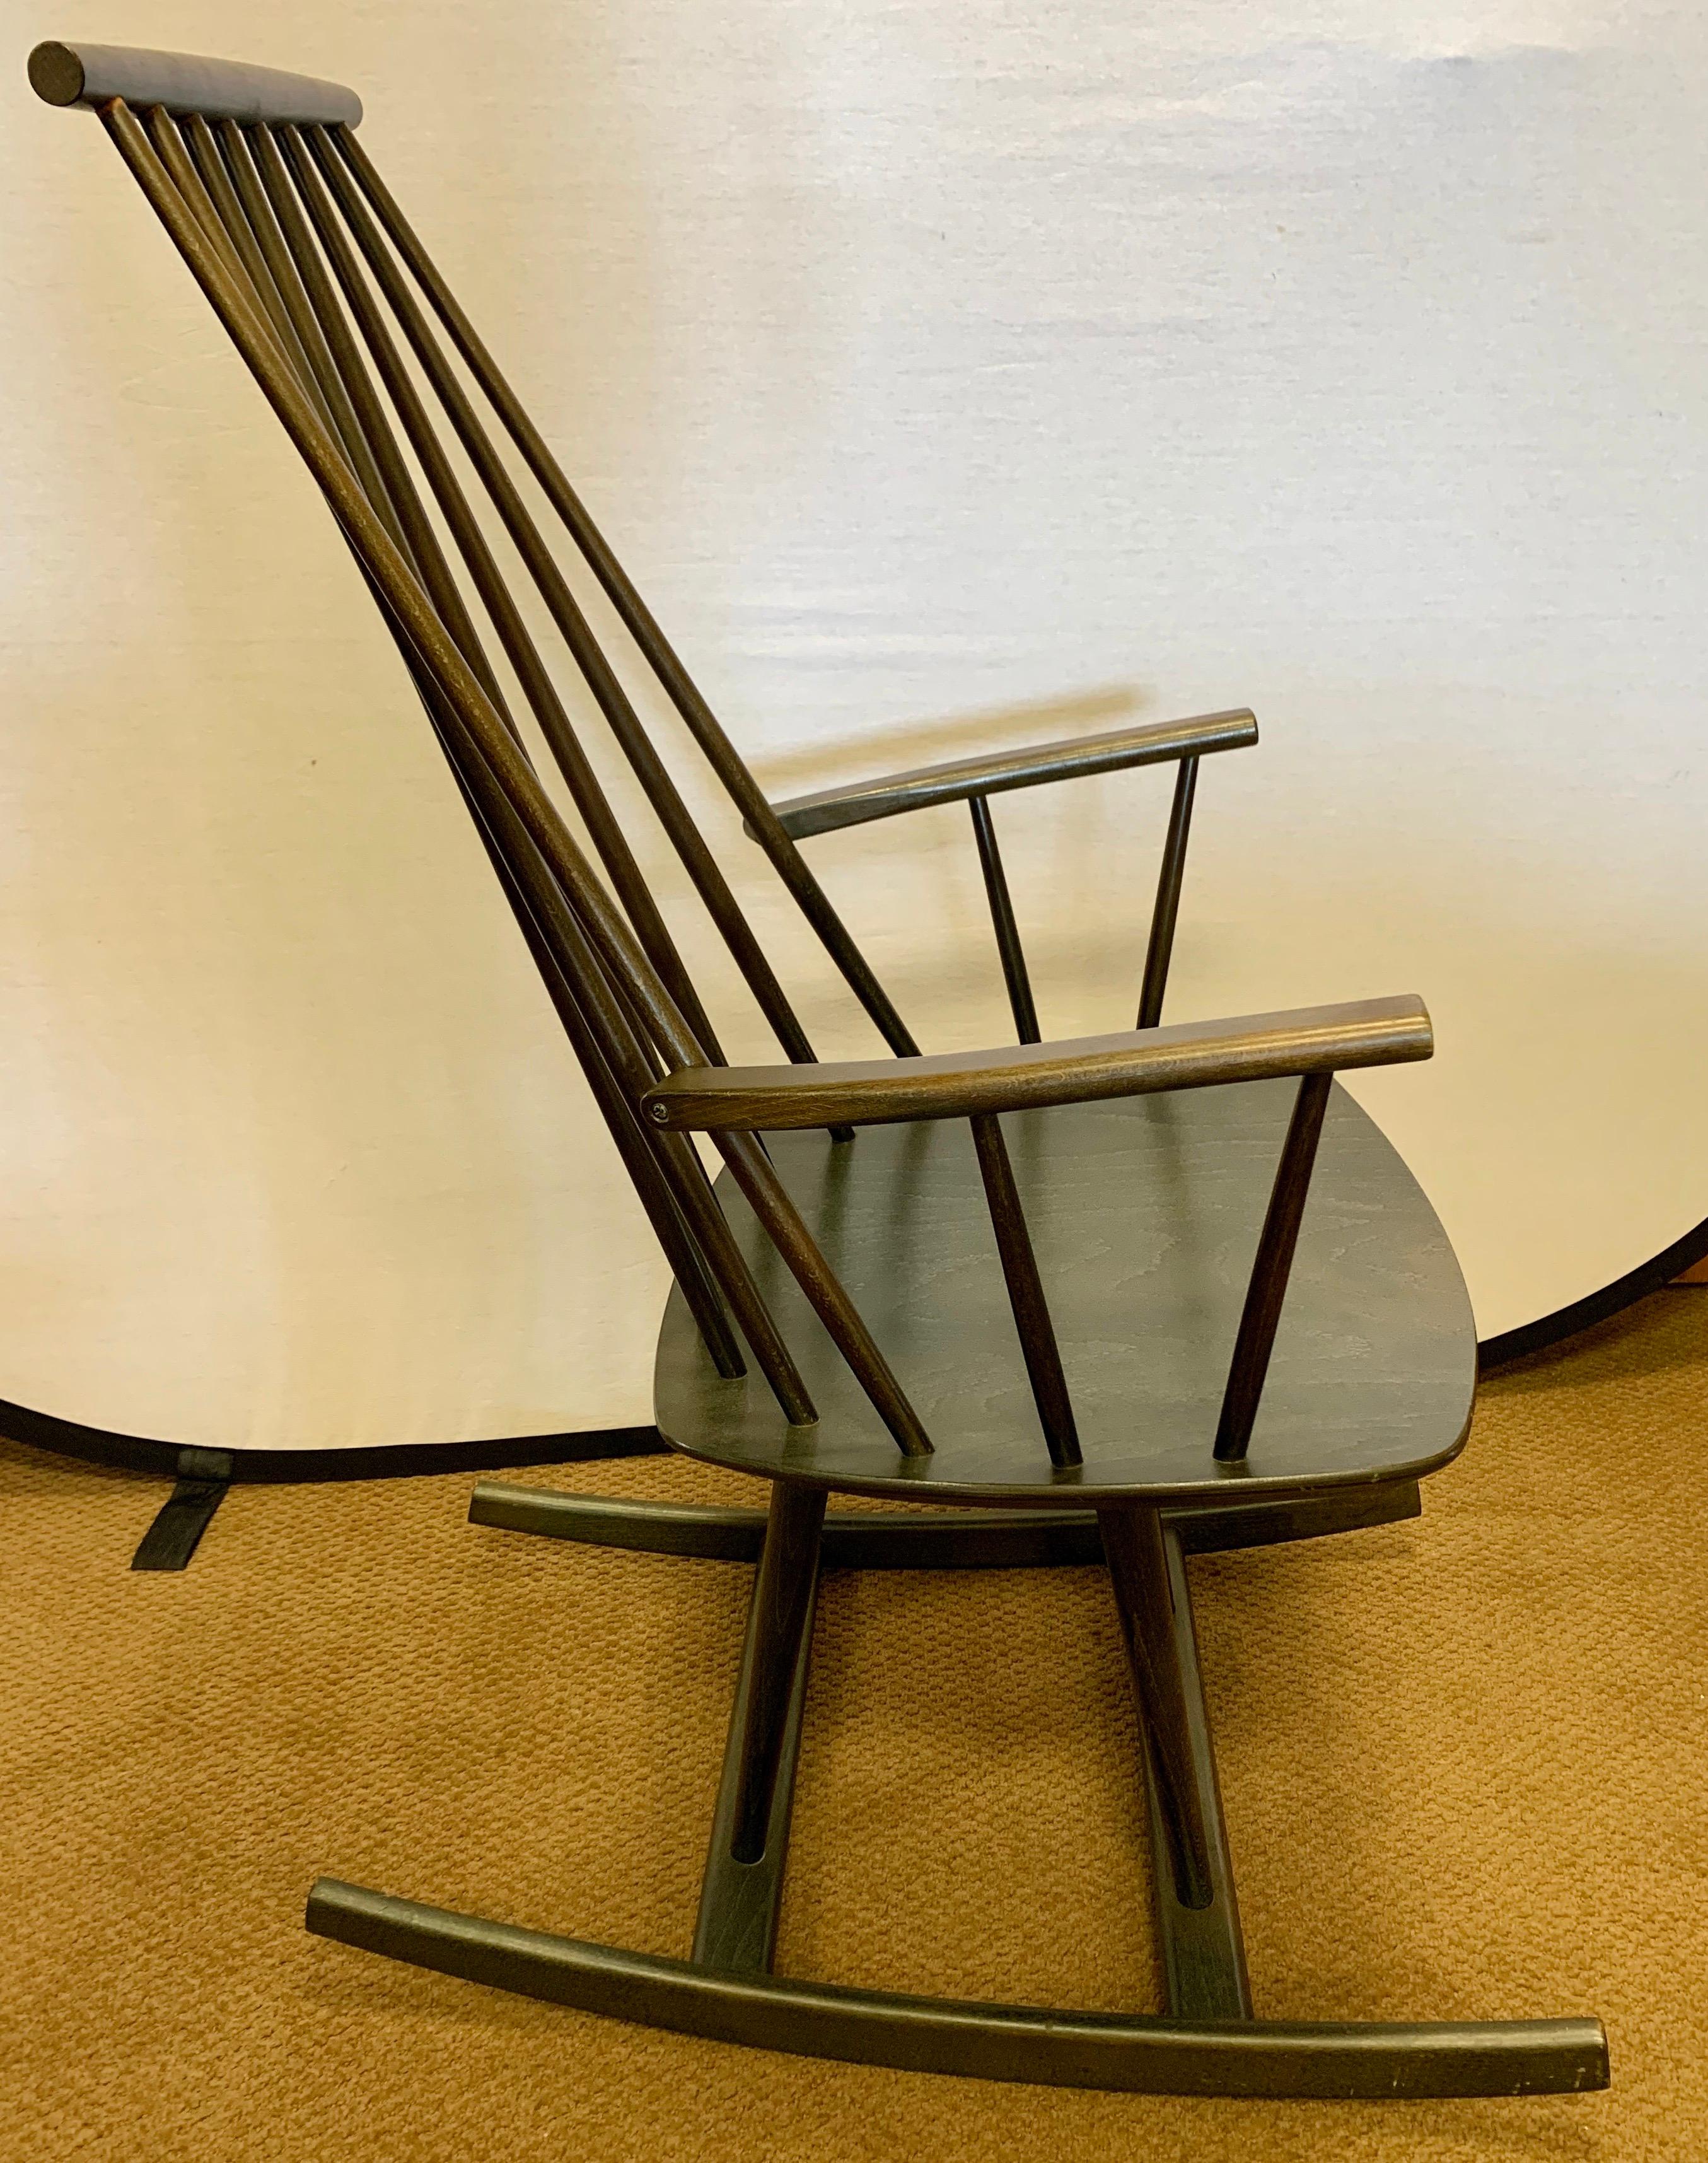 Coveted signed Danish Modern Möbler sculptural rocking chair. Iconic Danish modern classic in a dark mossy green color.. Hallmarks present on bottom, see photos. Sturdy with great lines.